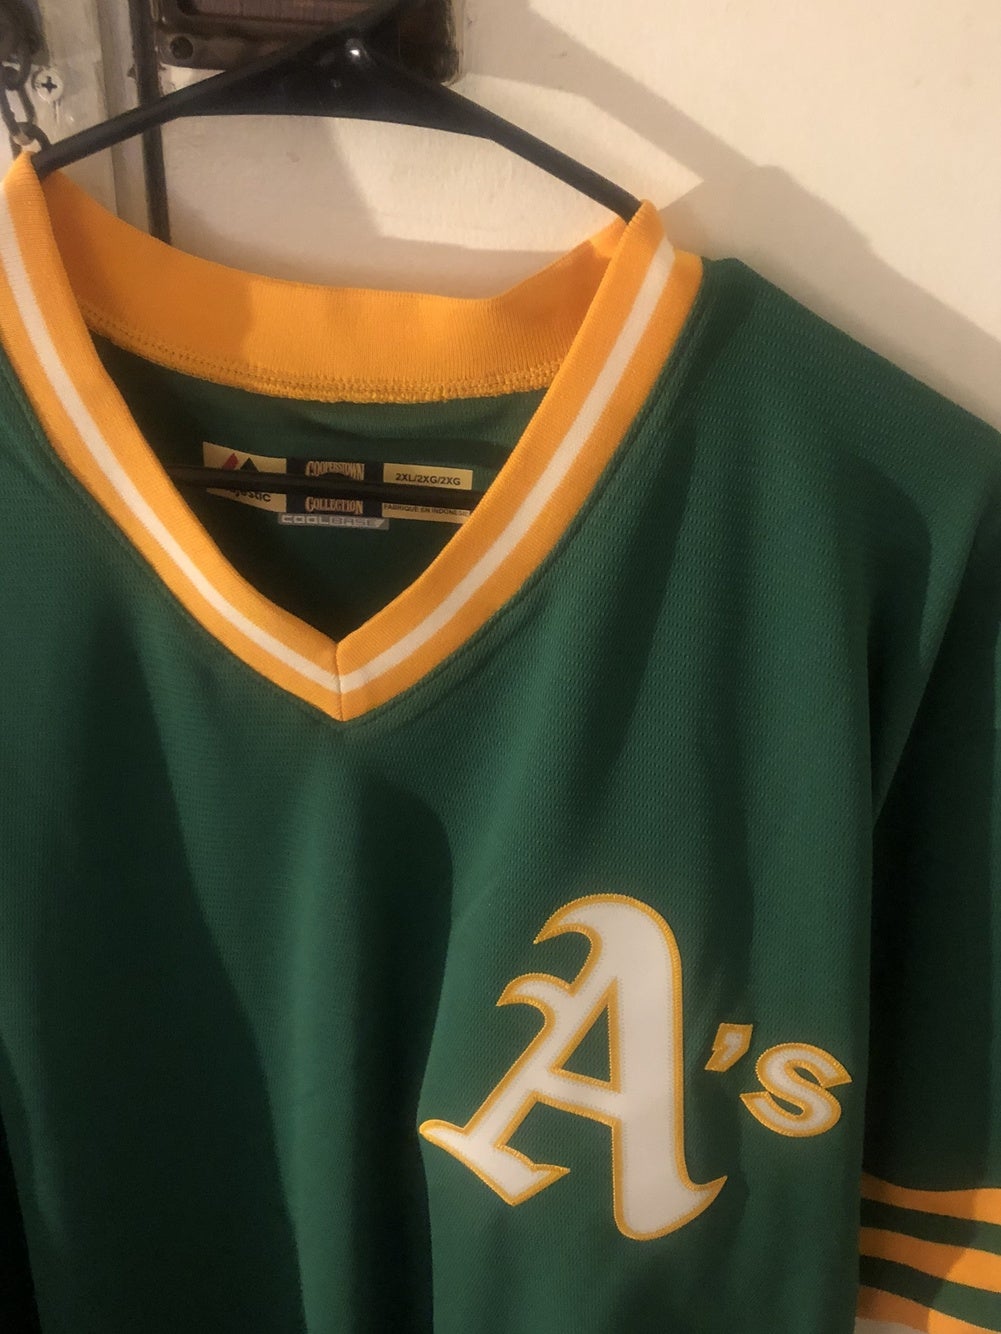 Oakland A's Majestic men's MLB pullover jersey XXL